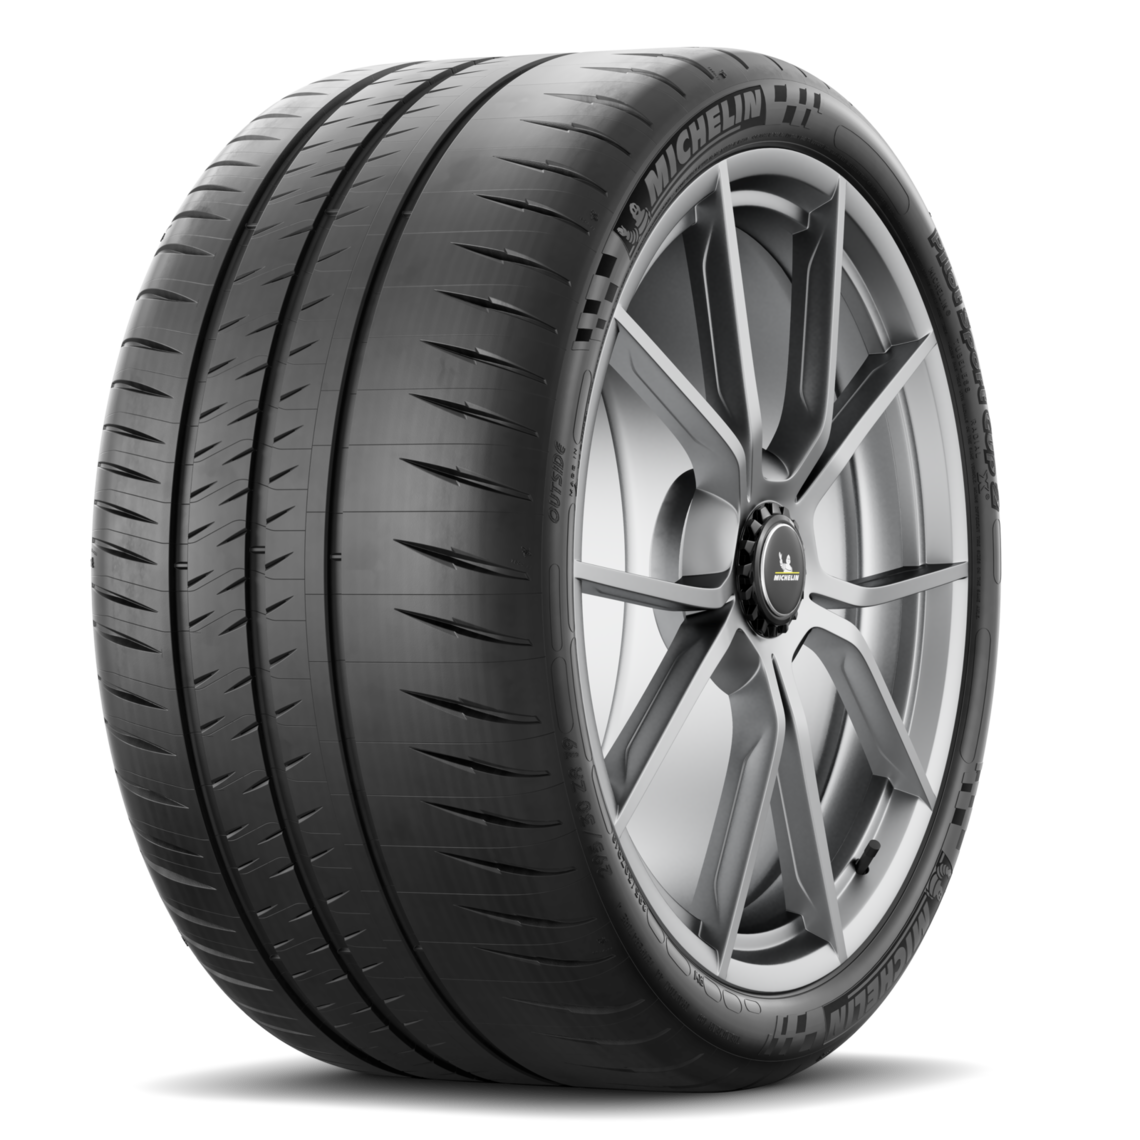 MICHELIN PILOT SPORT CUP 2 - Car Tyre | MICHELIN Middle-East Official  Website